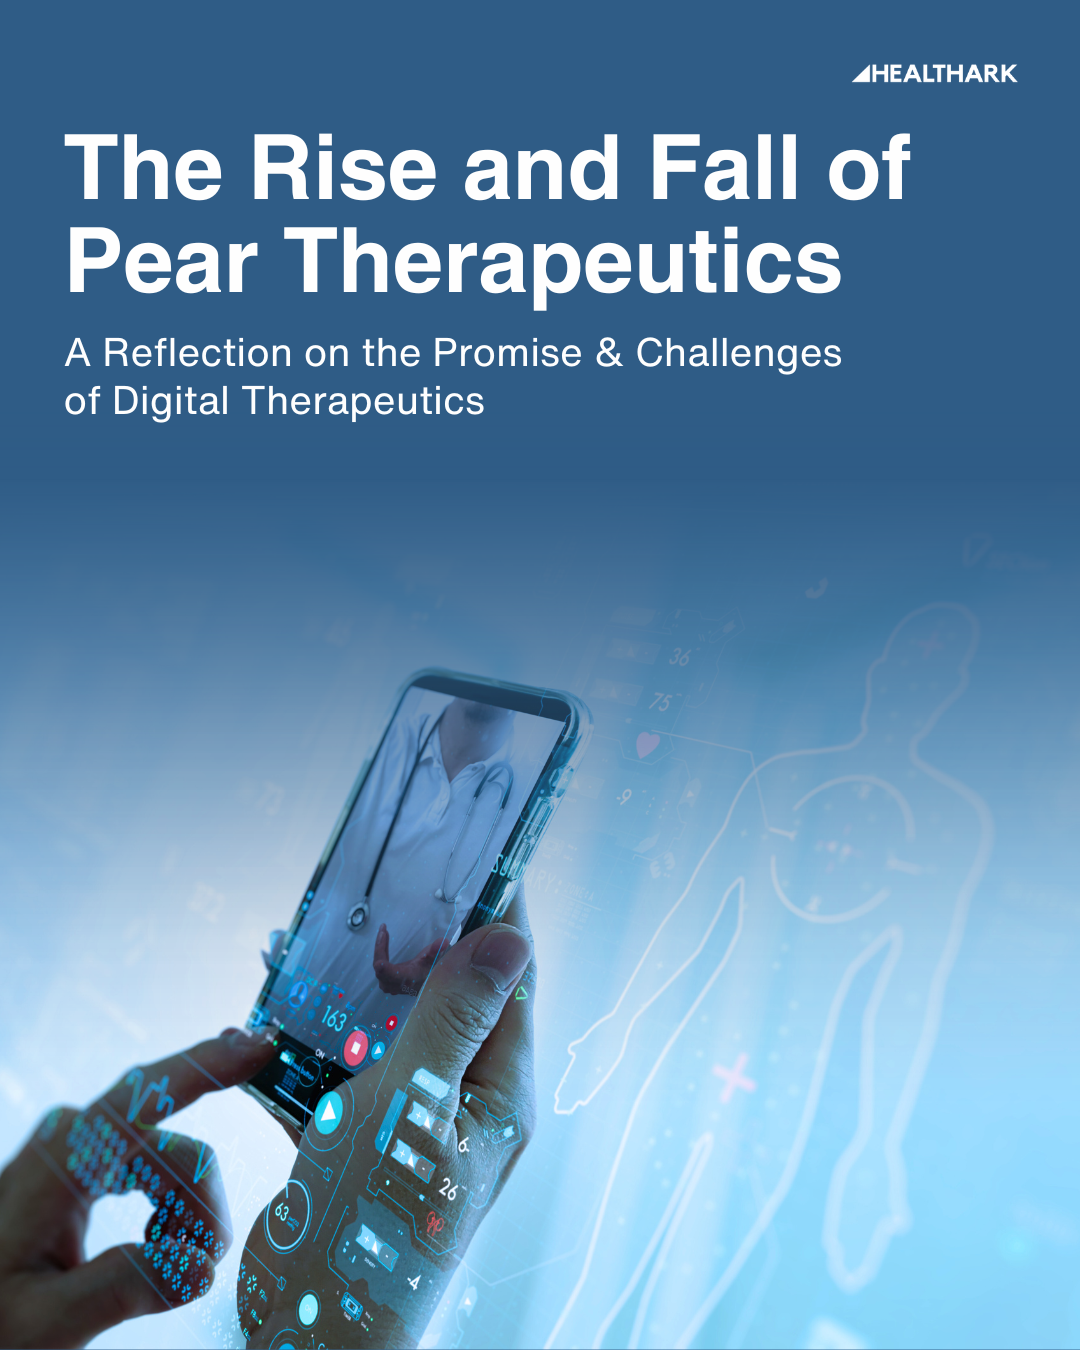 The Promise & Challenges of Digital Therapeutics